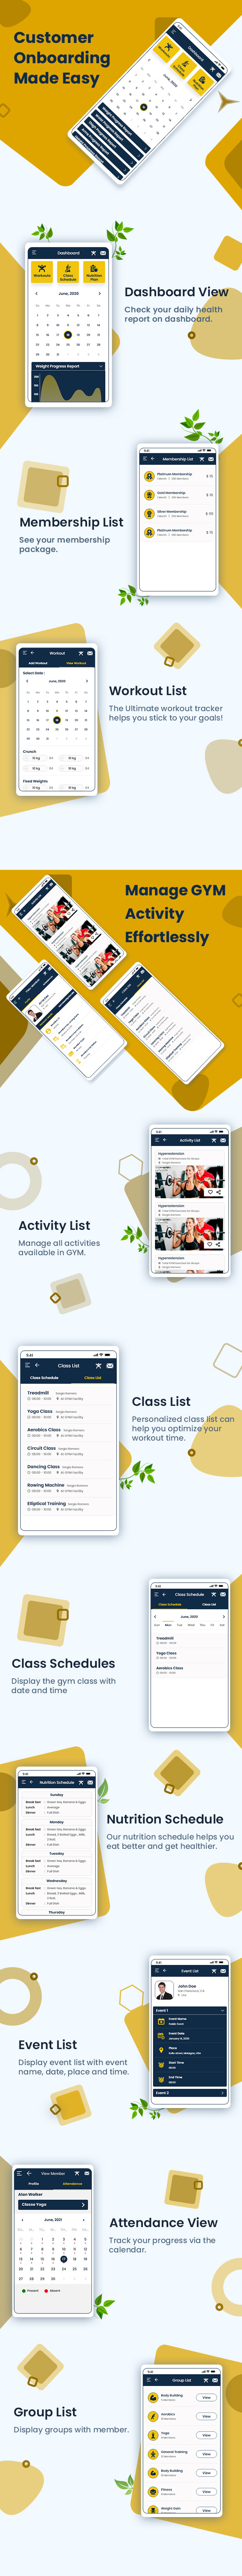 GYM Mobile Onboarding To Easy